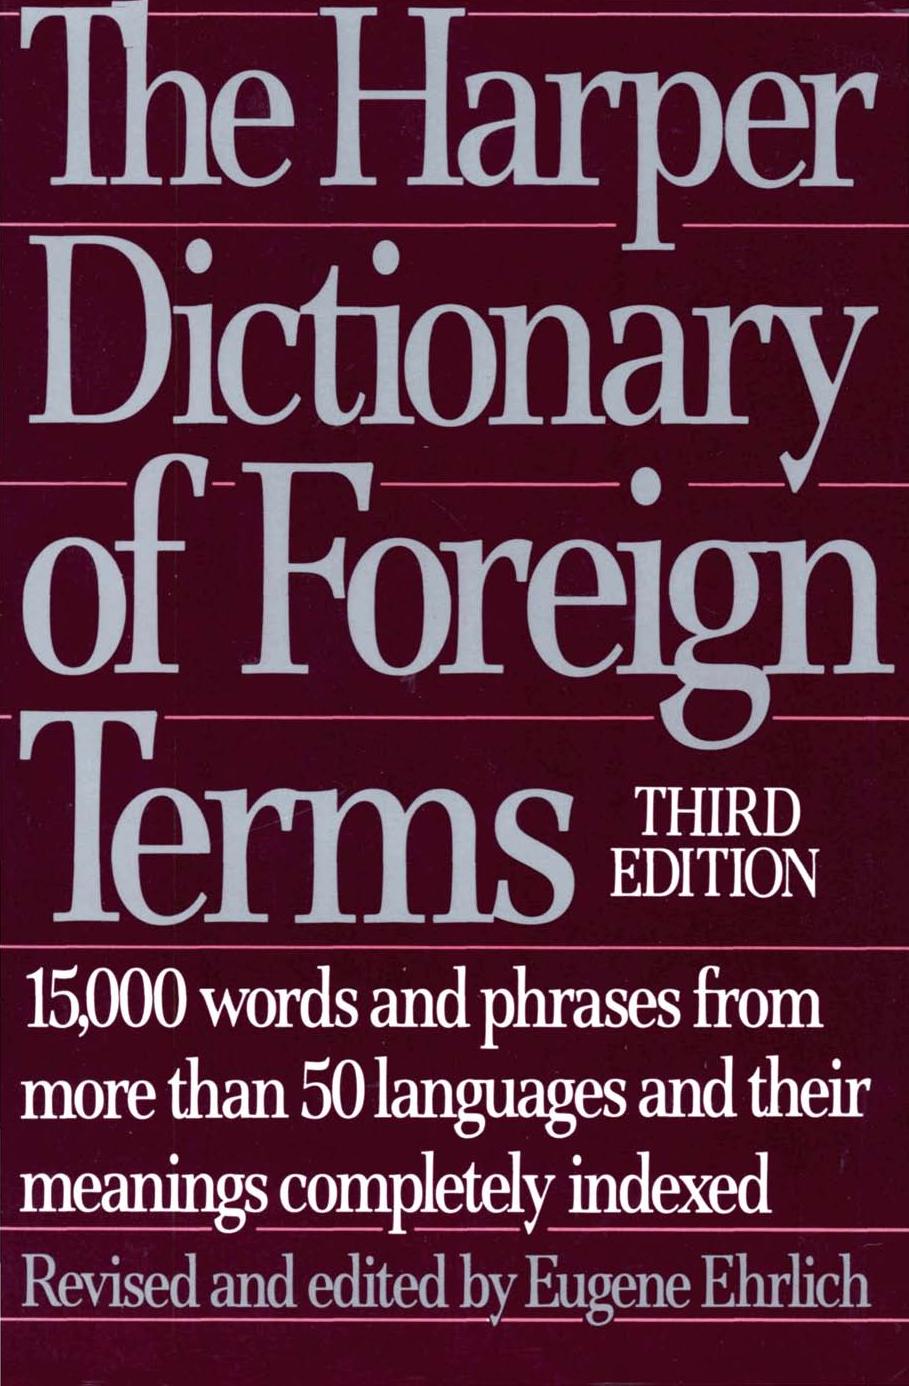 The Harper Dictionary of Foreign Terms: Based on the Original Edition by C.O. Sylvester Mawson